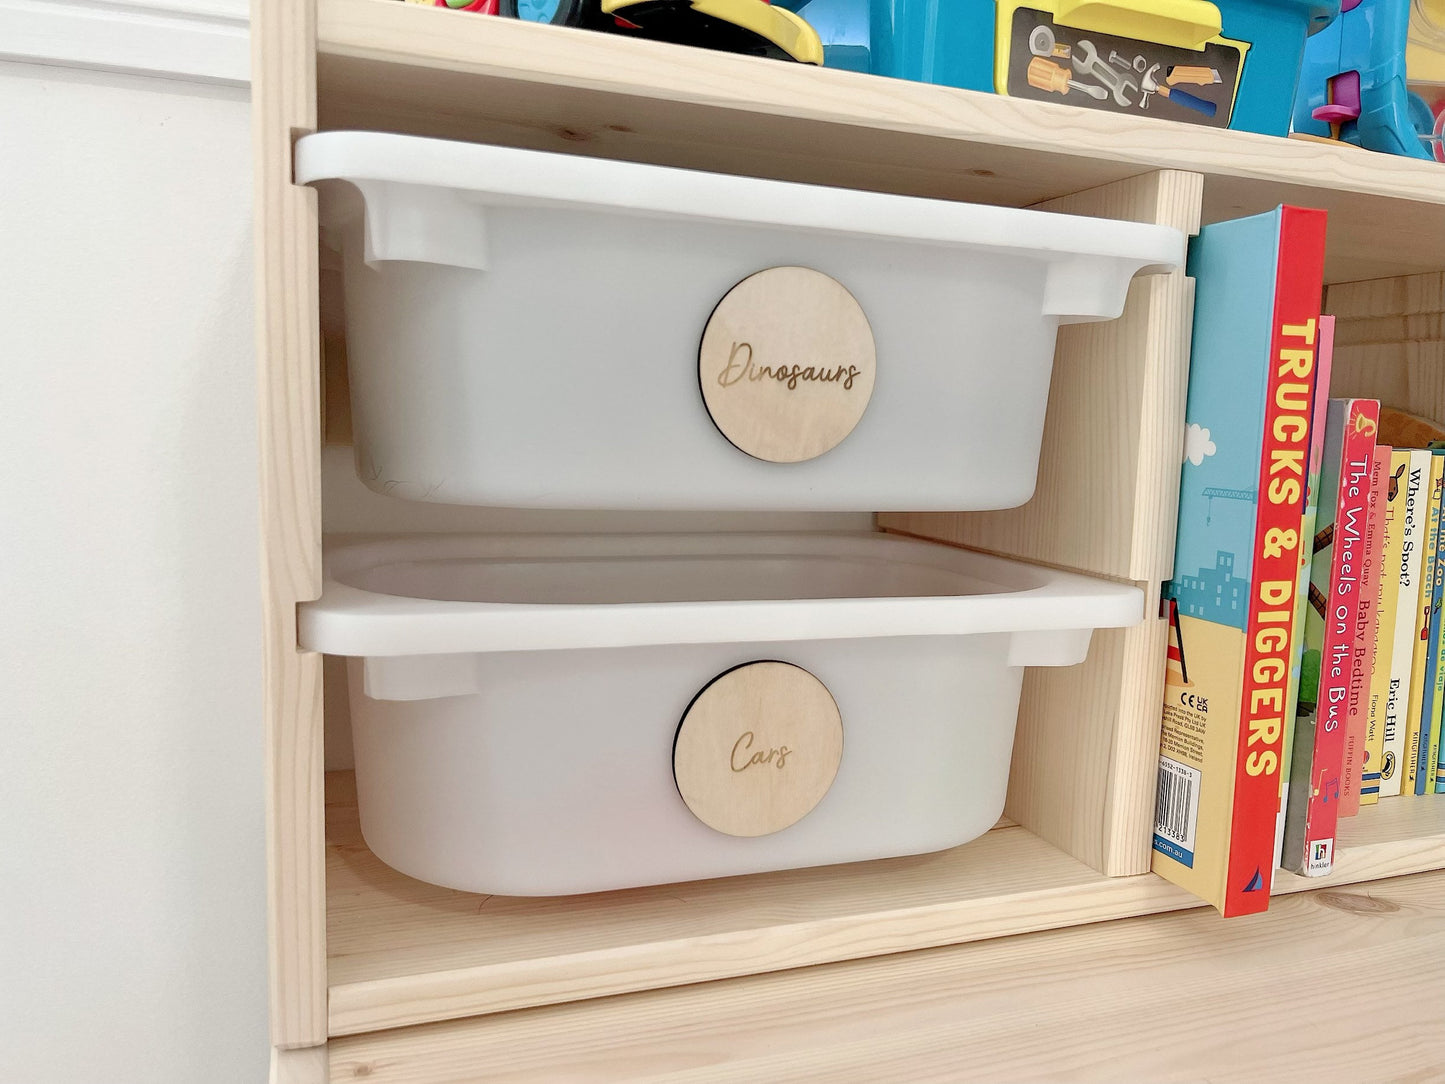 PERSONALISED WOODEN ENGRAVED TOY STORAGE LABELS - KEEP TOYS ORGANISED IN STYLE!